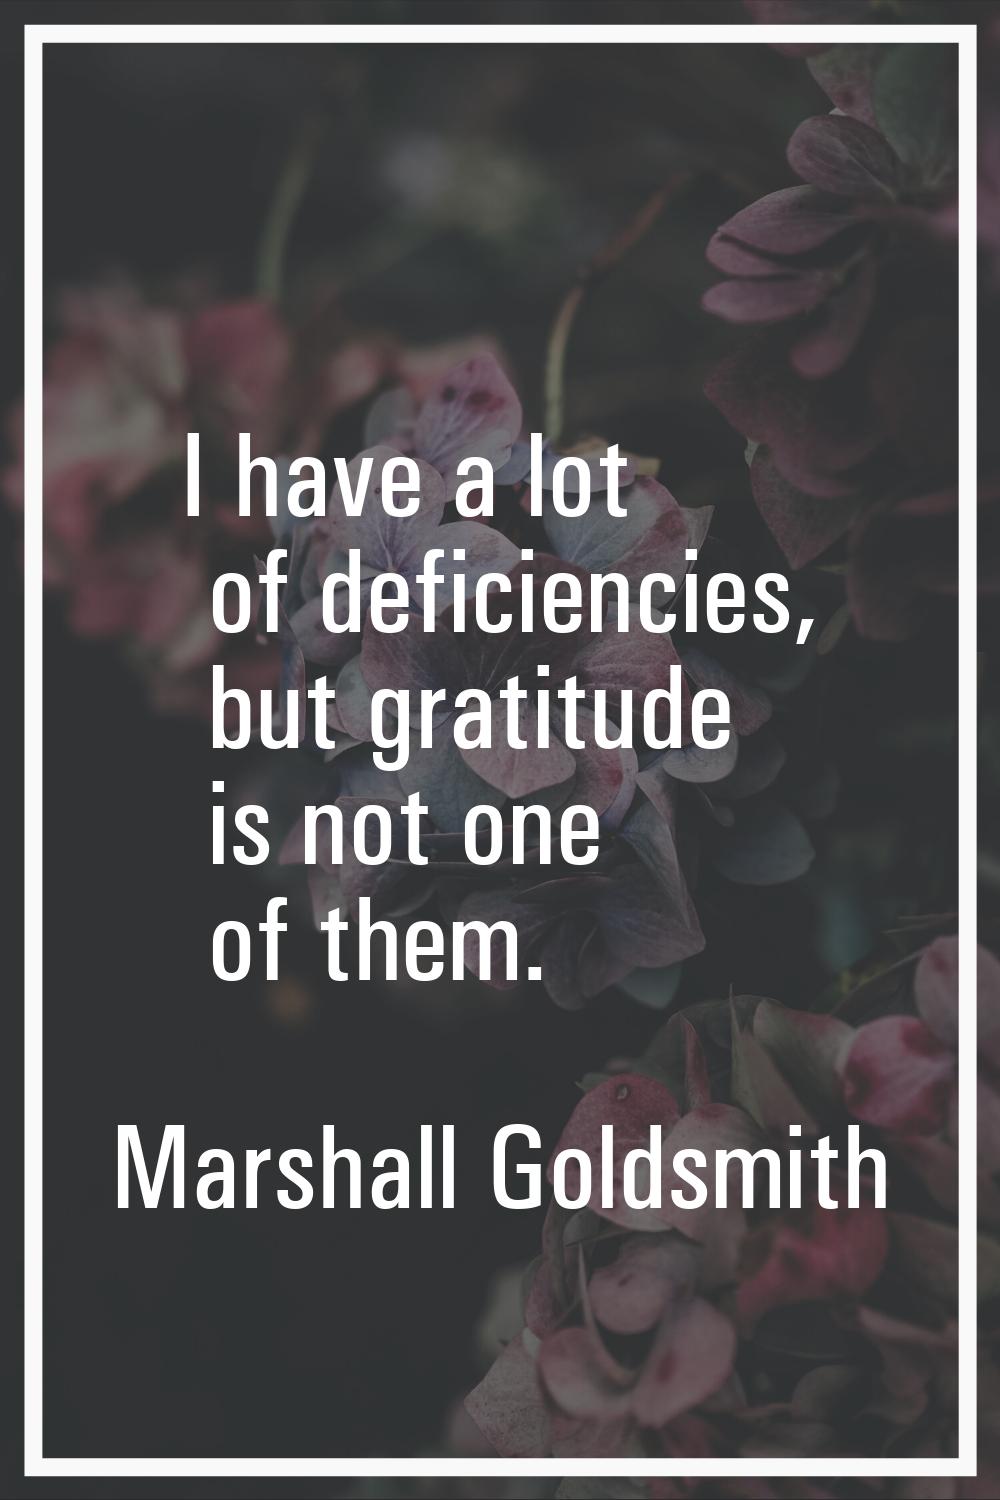 I have a lot of deficiencies, but gratitude is not one of them.